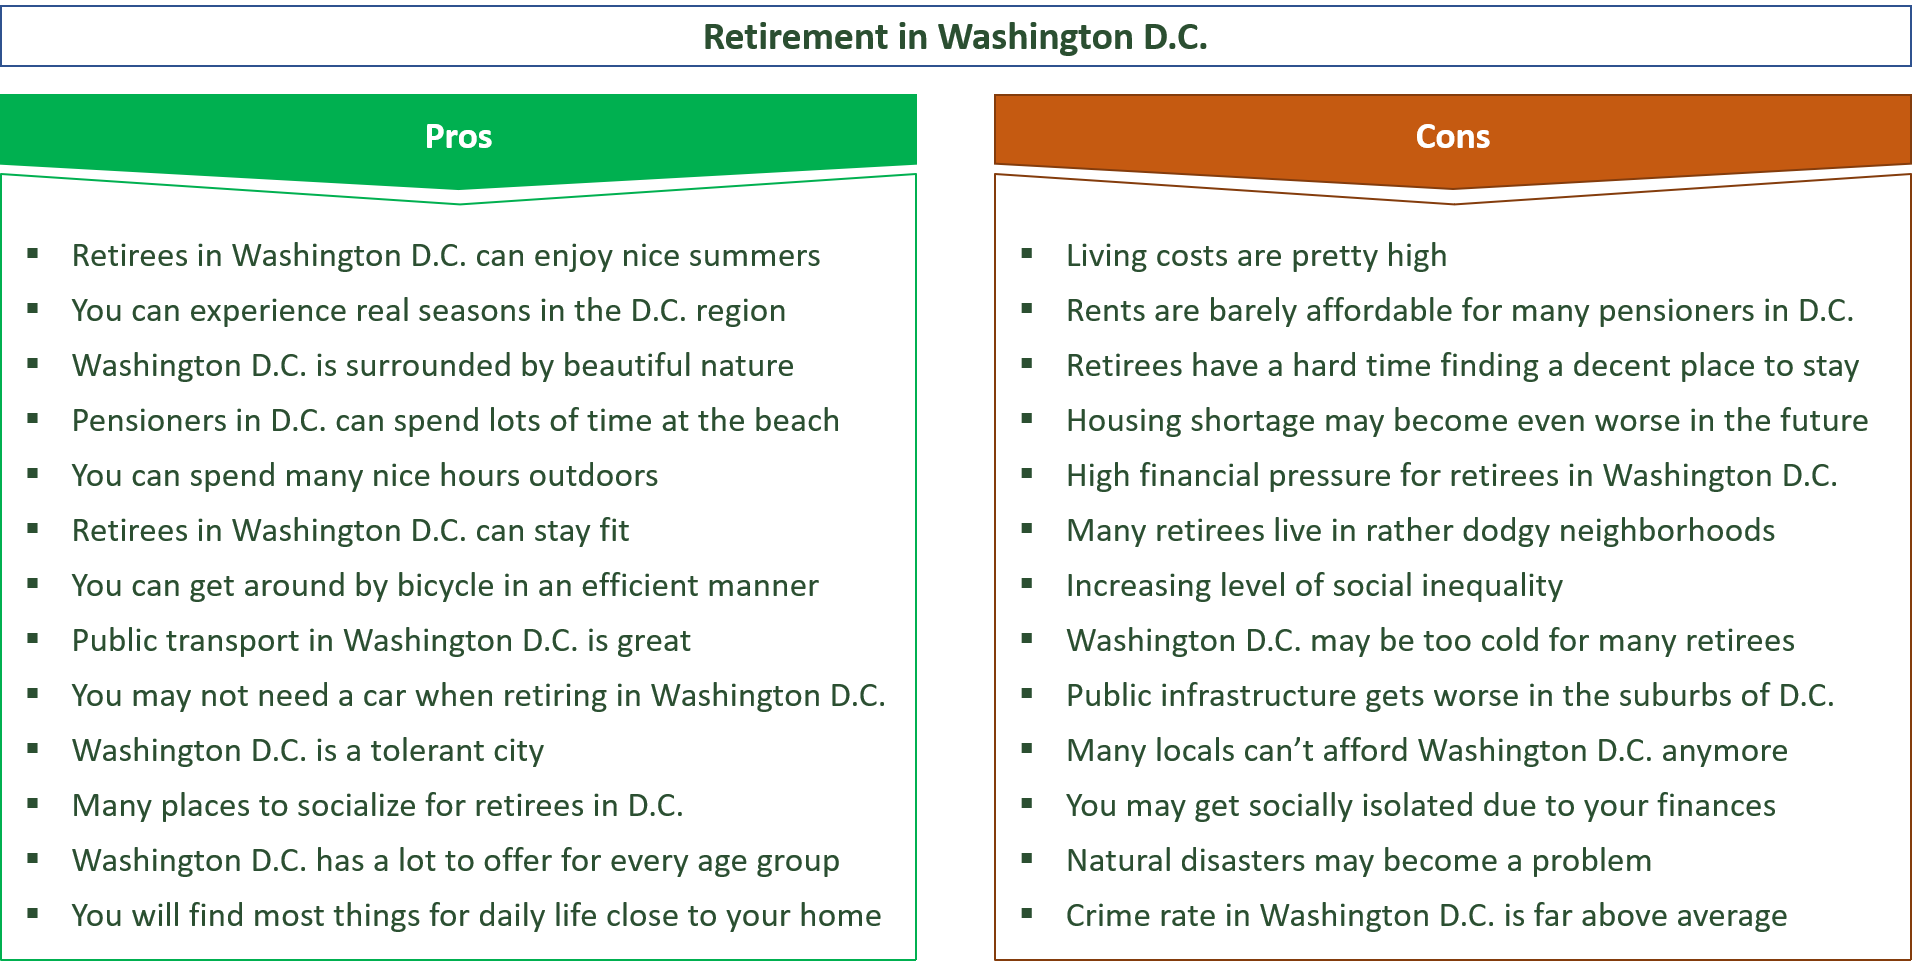 advantages and disadvantages of retiring in washington d.c.